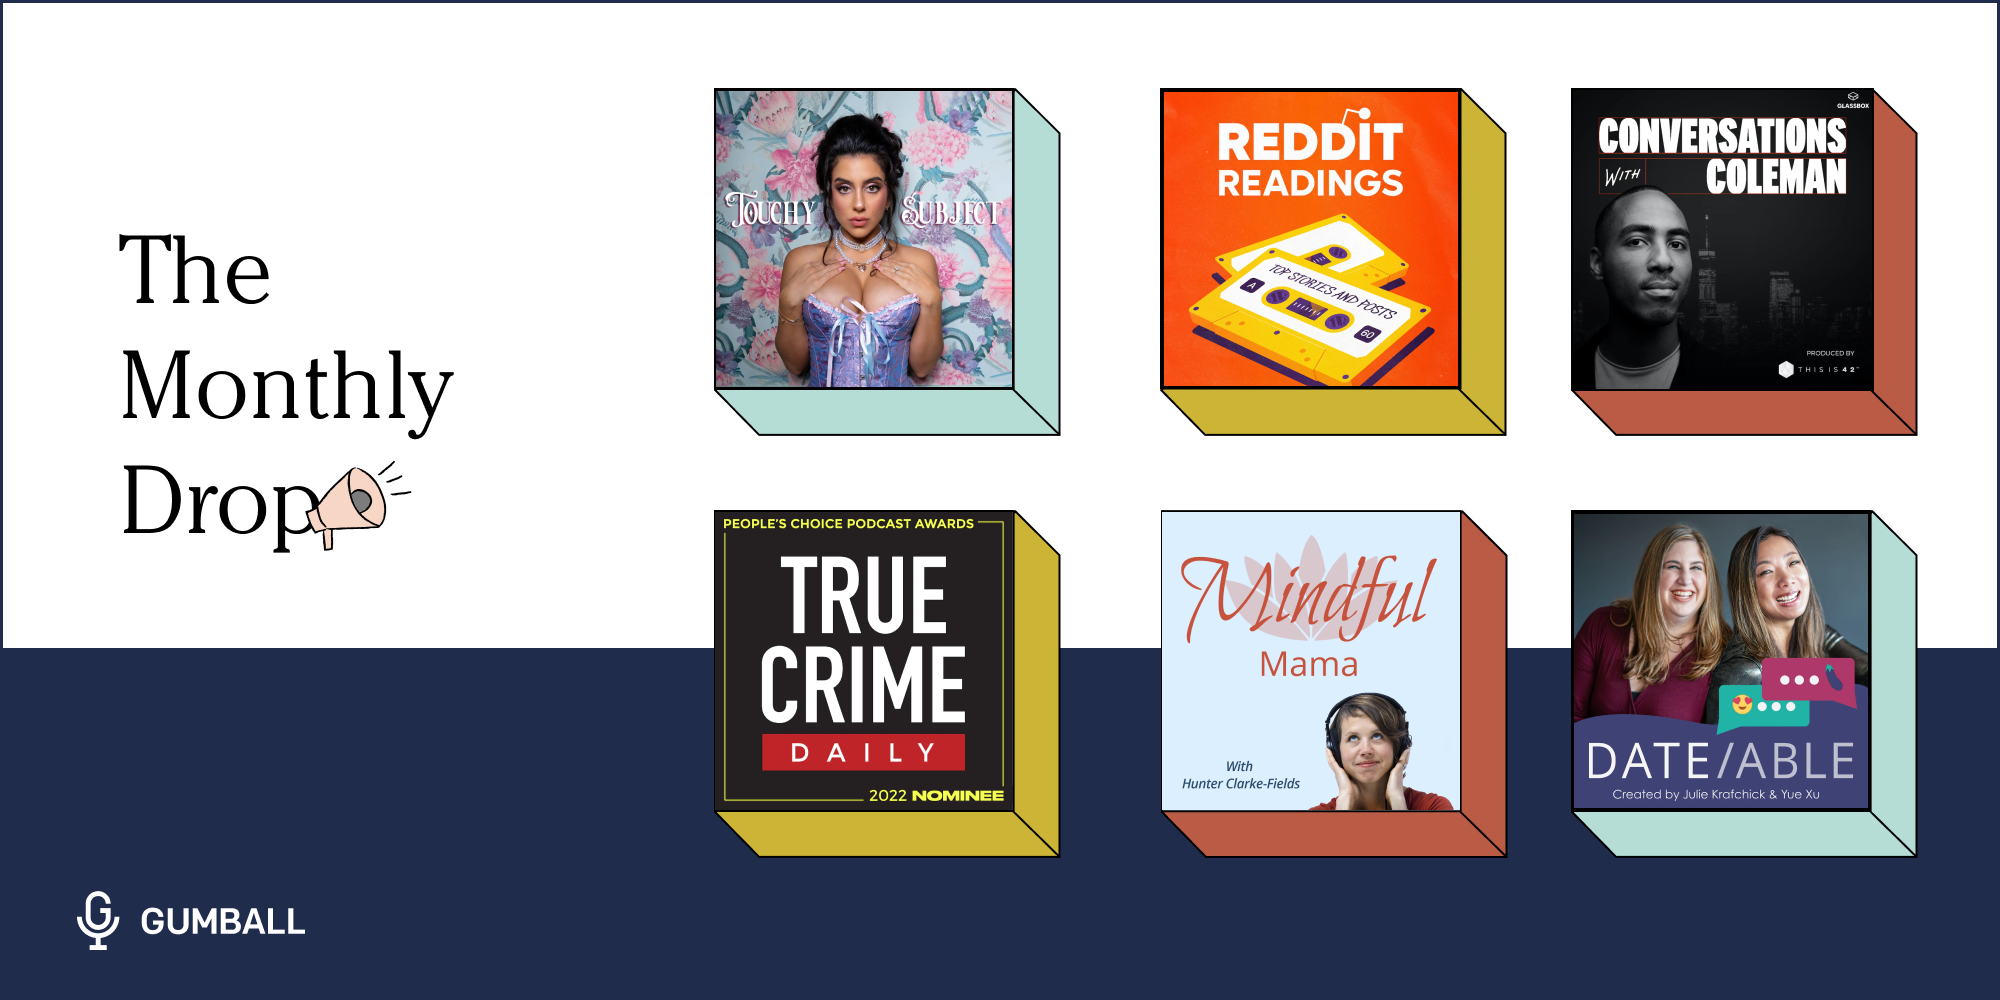 key art from six podcasts touchy subject reddit readings mindful mama conversations with coleman true crime daily dateable 